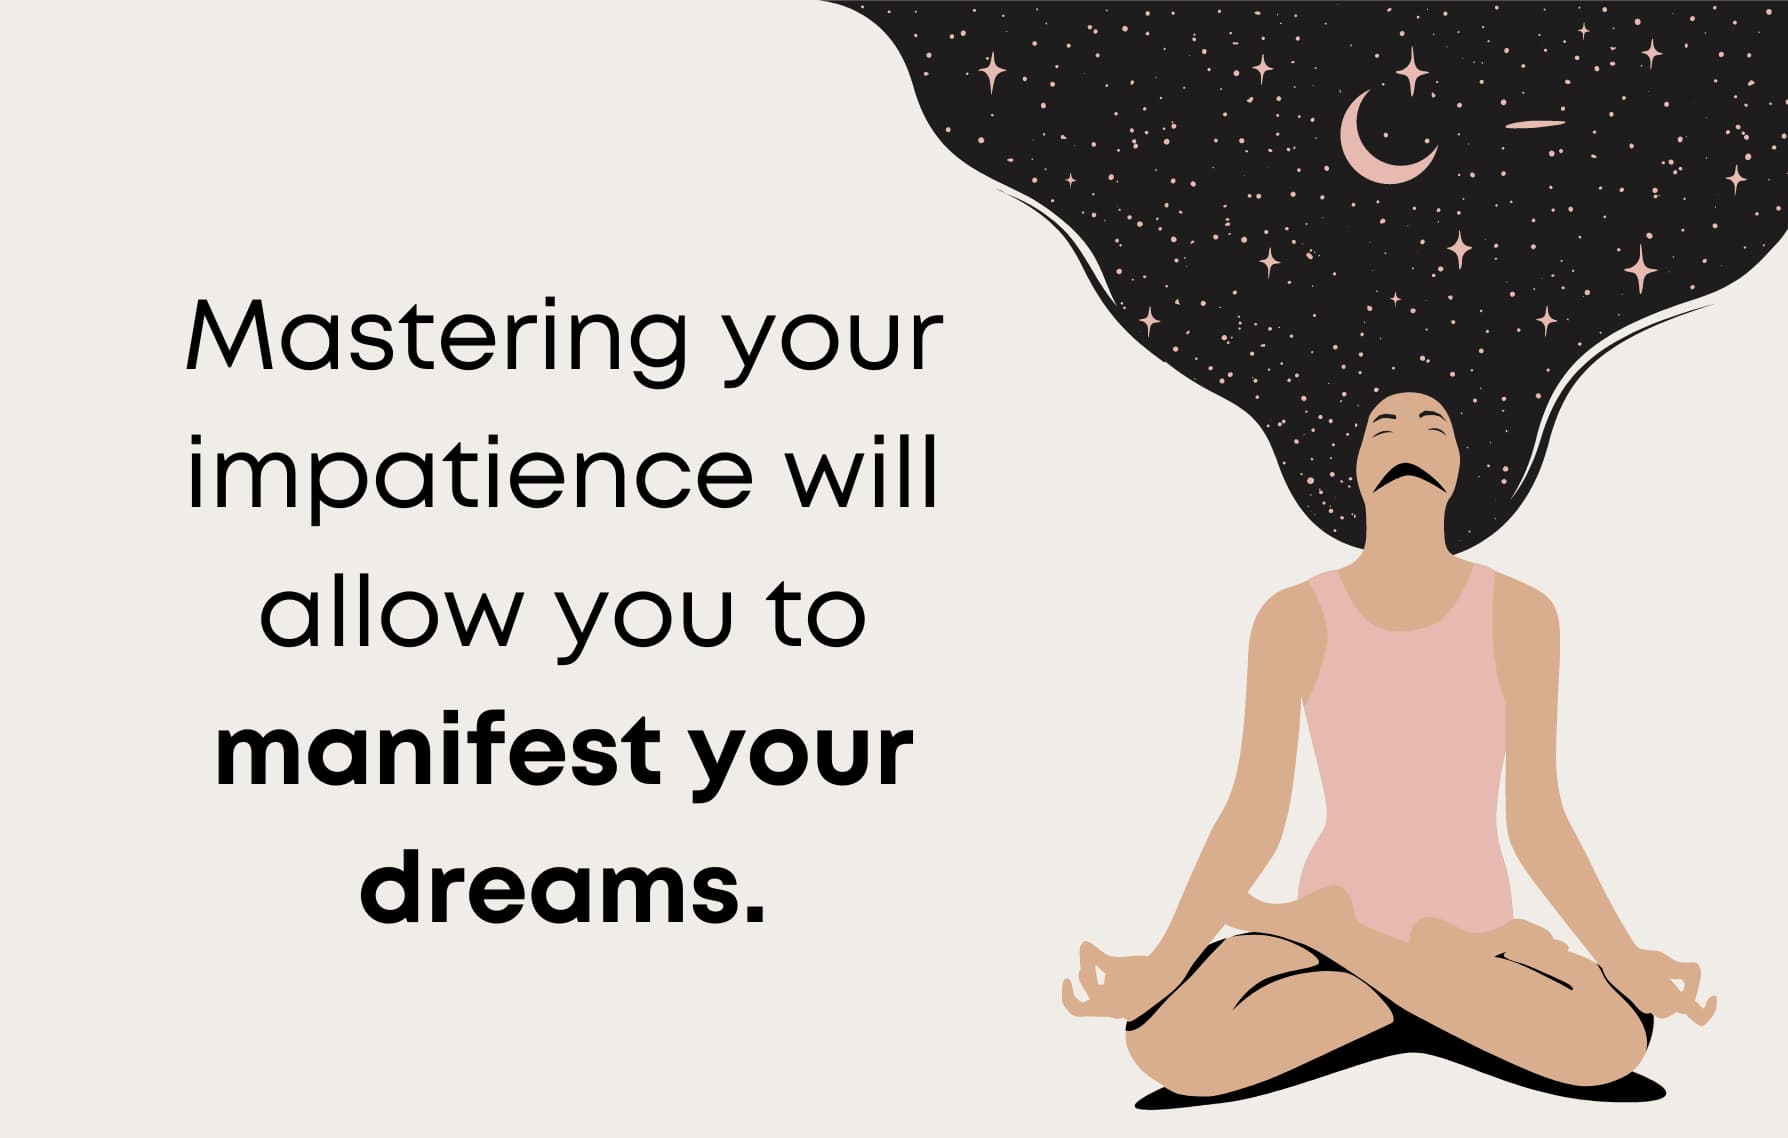 Mastering your impatience will allow you to manifest your dreams.